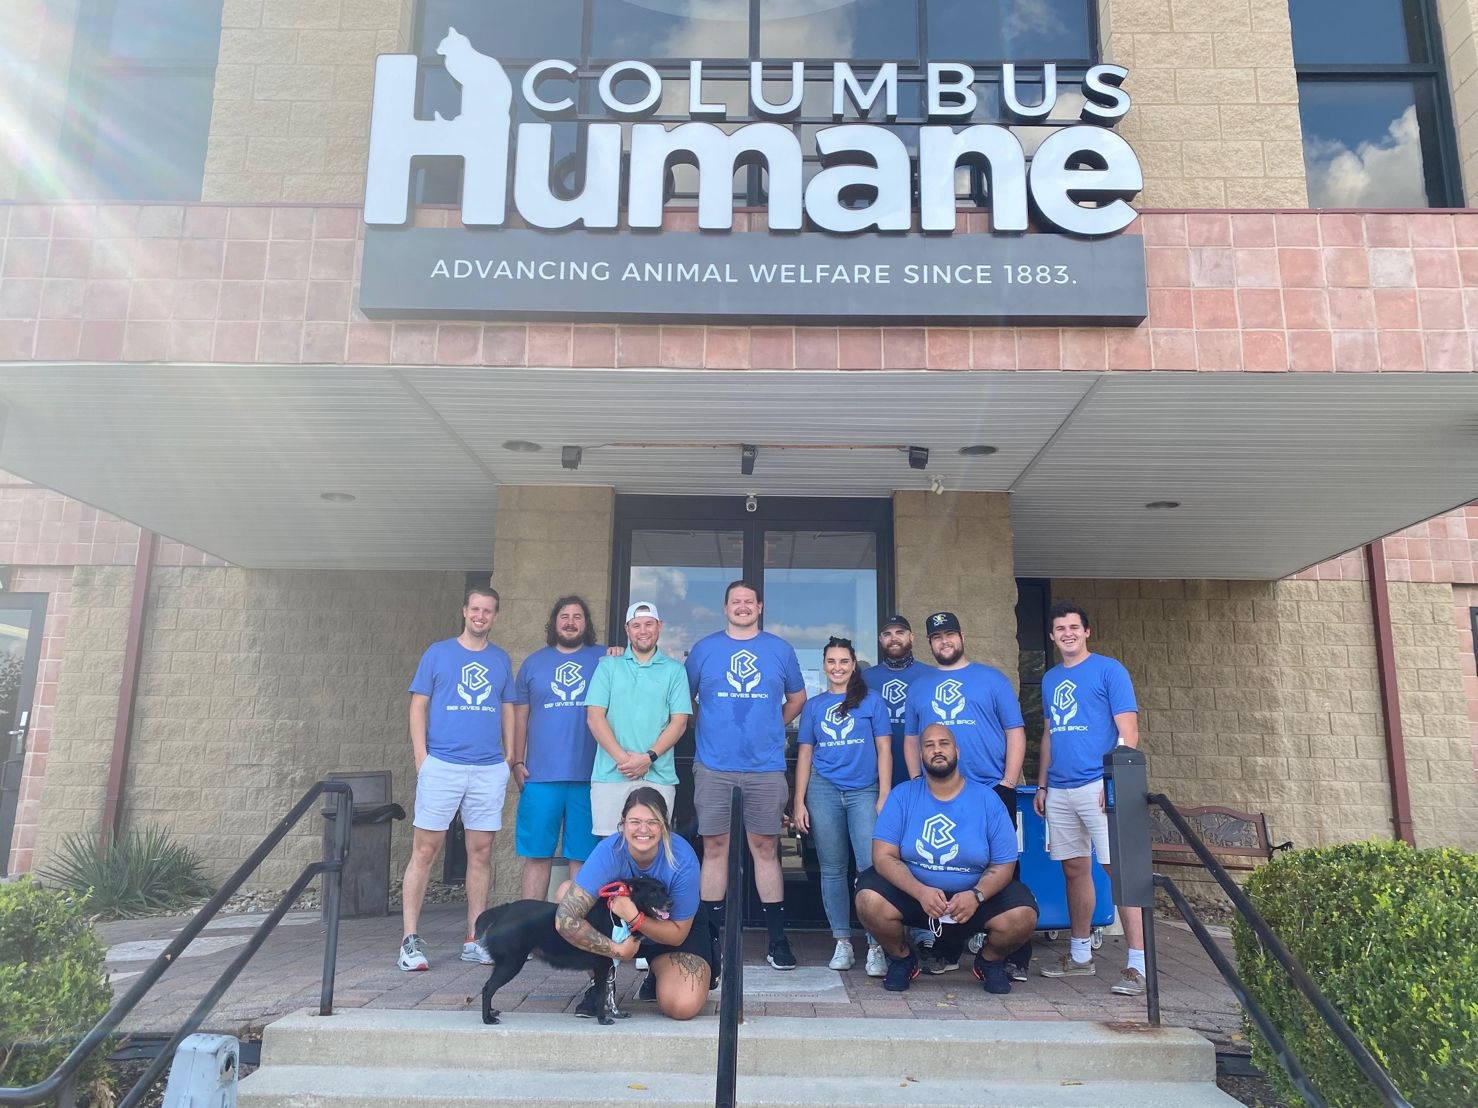 A few members of our team volunteering at Columbus Humane Animal Shelter